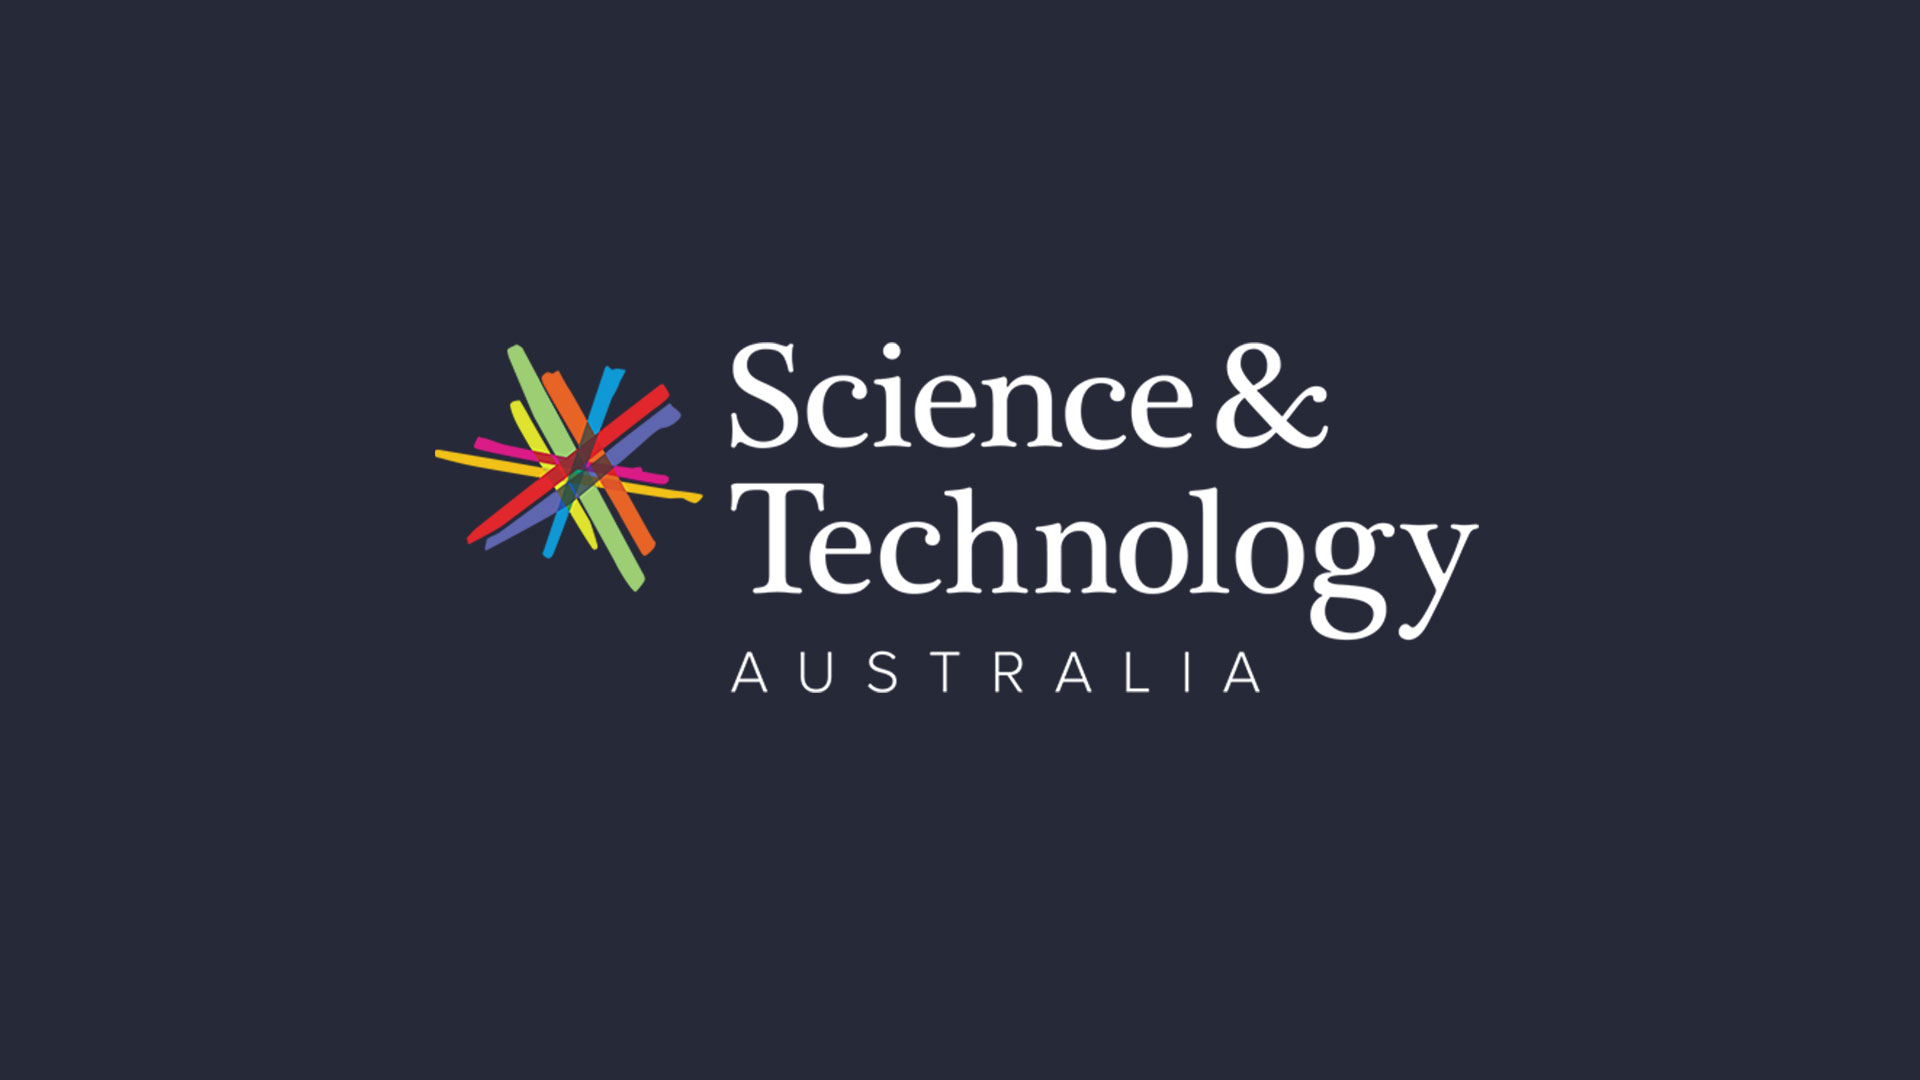 Australia’s leading voice for scientists and technologists welcomes the Australian Government’s announcement of a review to drive stronger gains on diversity in the sector and its workforce.